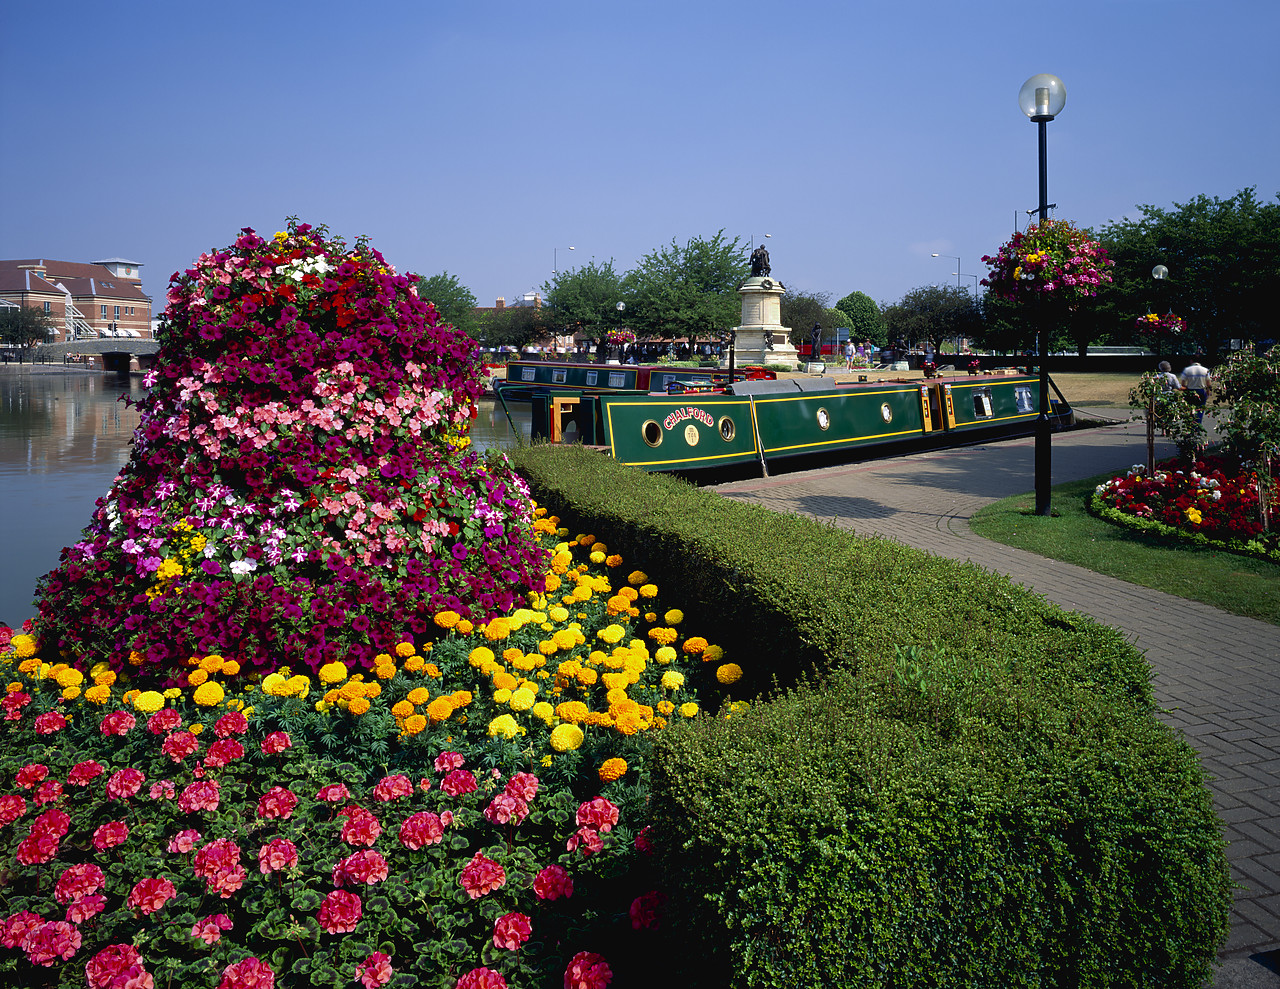 #944810-3 - Flower Bed & Canal Boats, Stratford-upon-Avon, Warwickshire, England